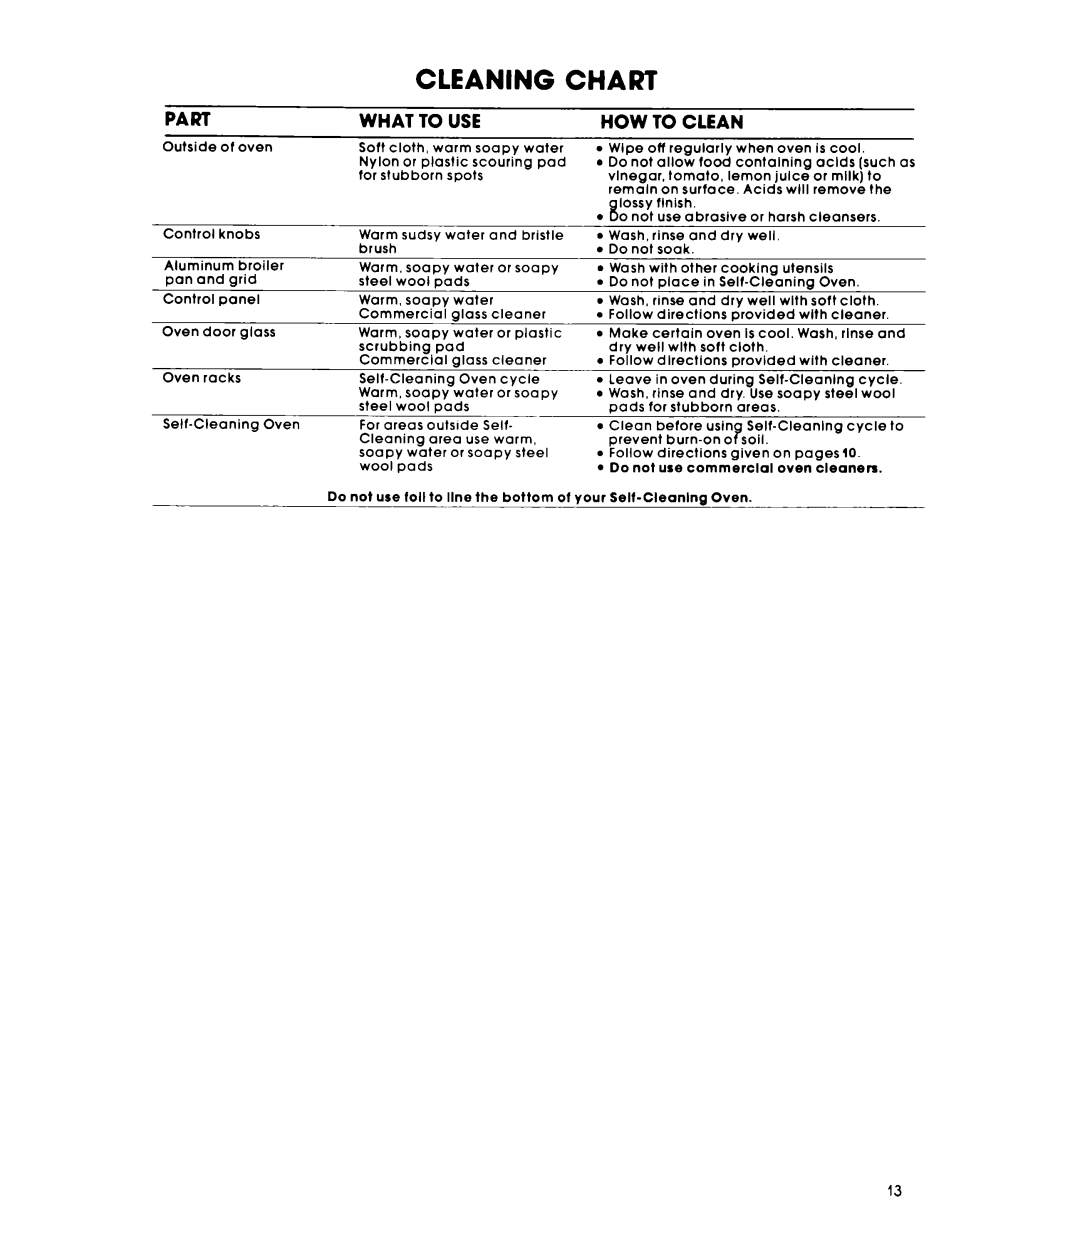 Whirlpool RB260PXK warranty Cleaning Chart, Part, What To Use, How To Clean 